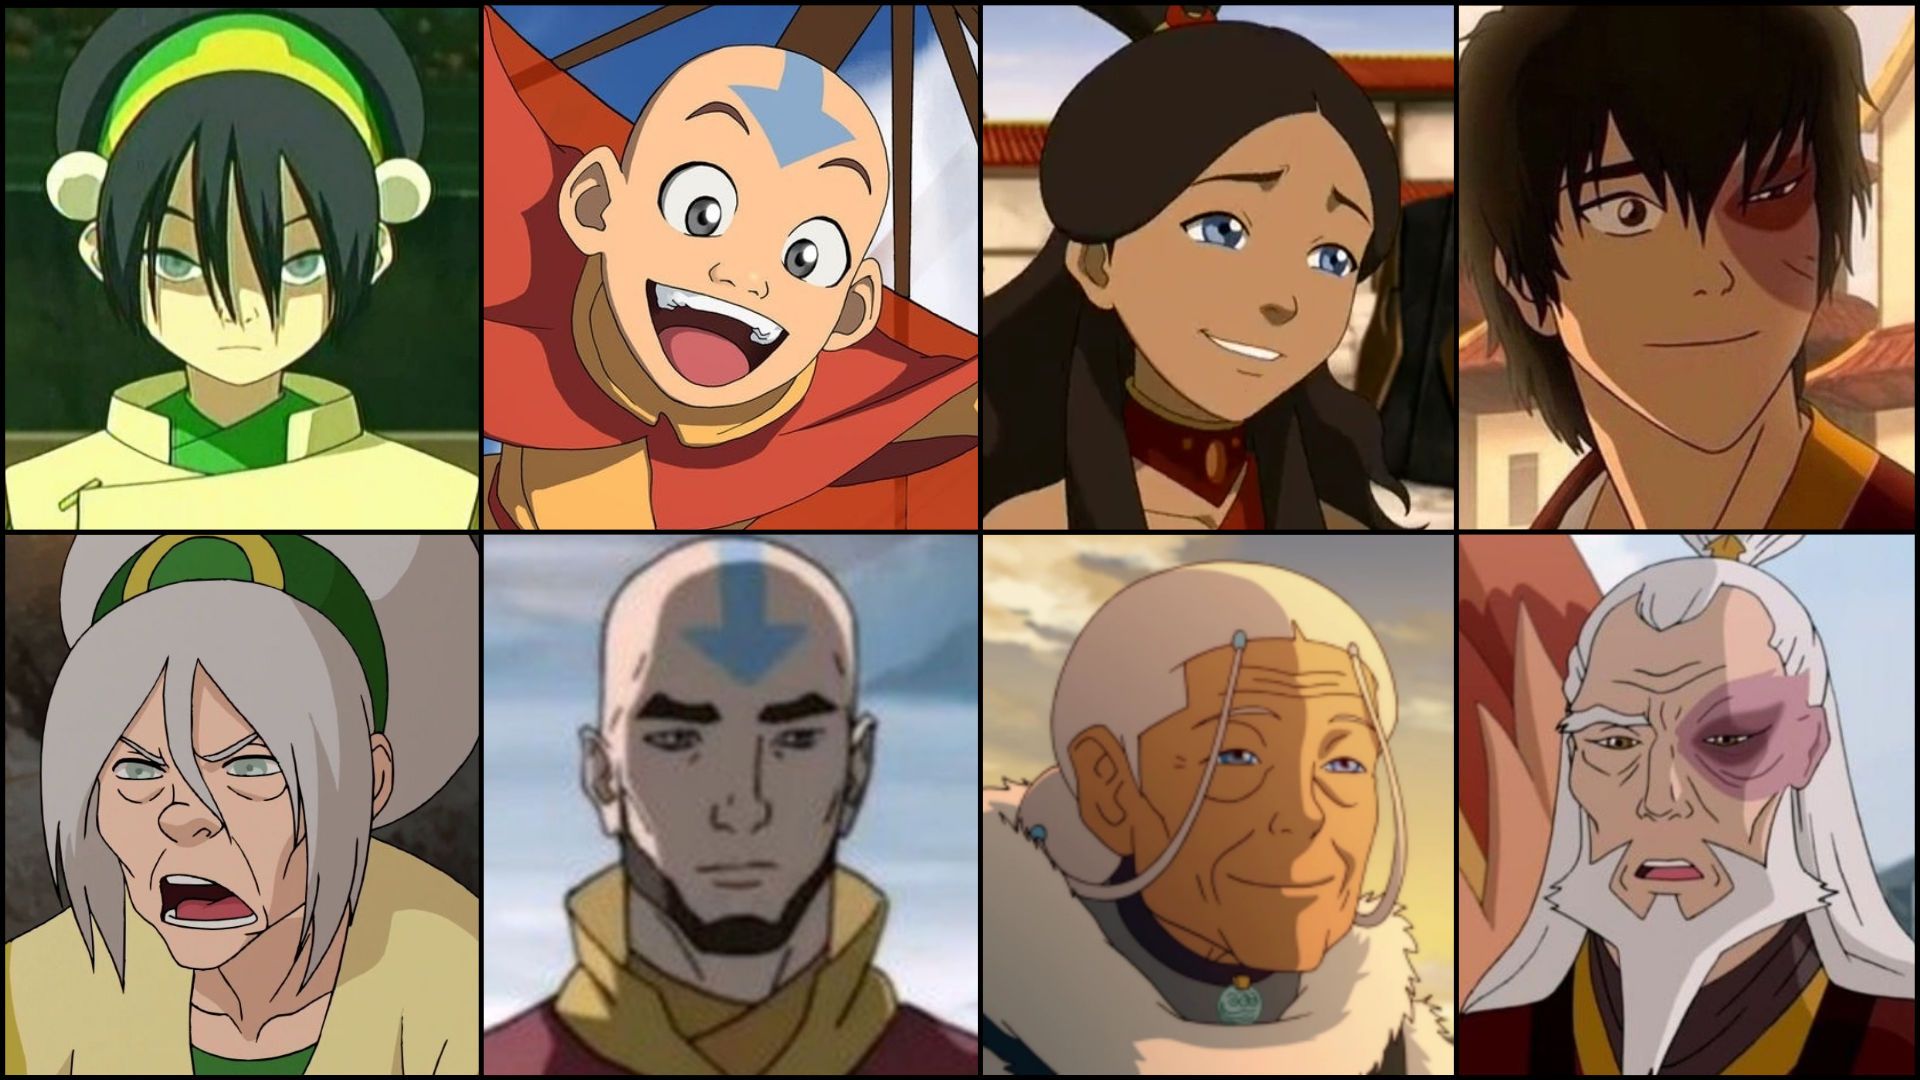 Avatar Every Last Airbender Character That Returned In Legend of Korra